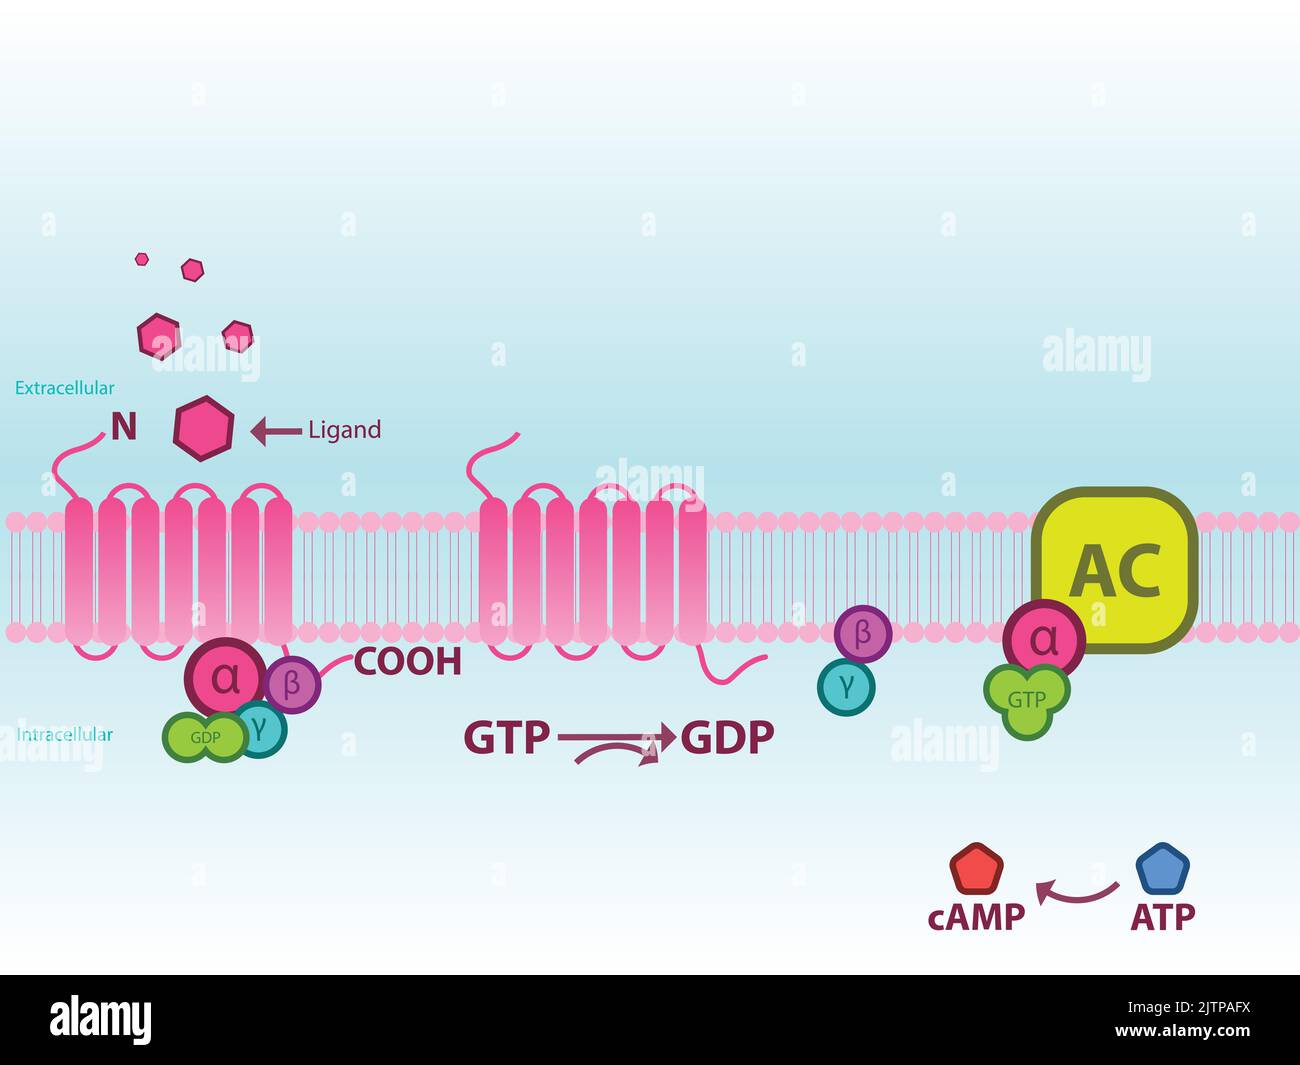 Process of Adenylate cyclase activation via GPCR Gs and cAMP production amplification. Infographic for education, pharmacology, biology. Stock Vector